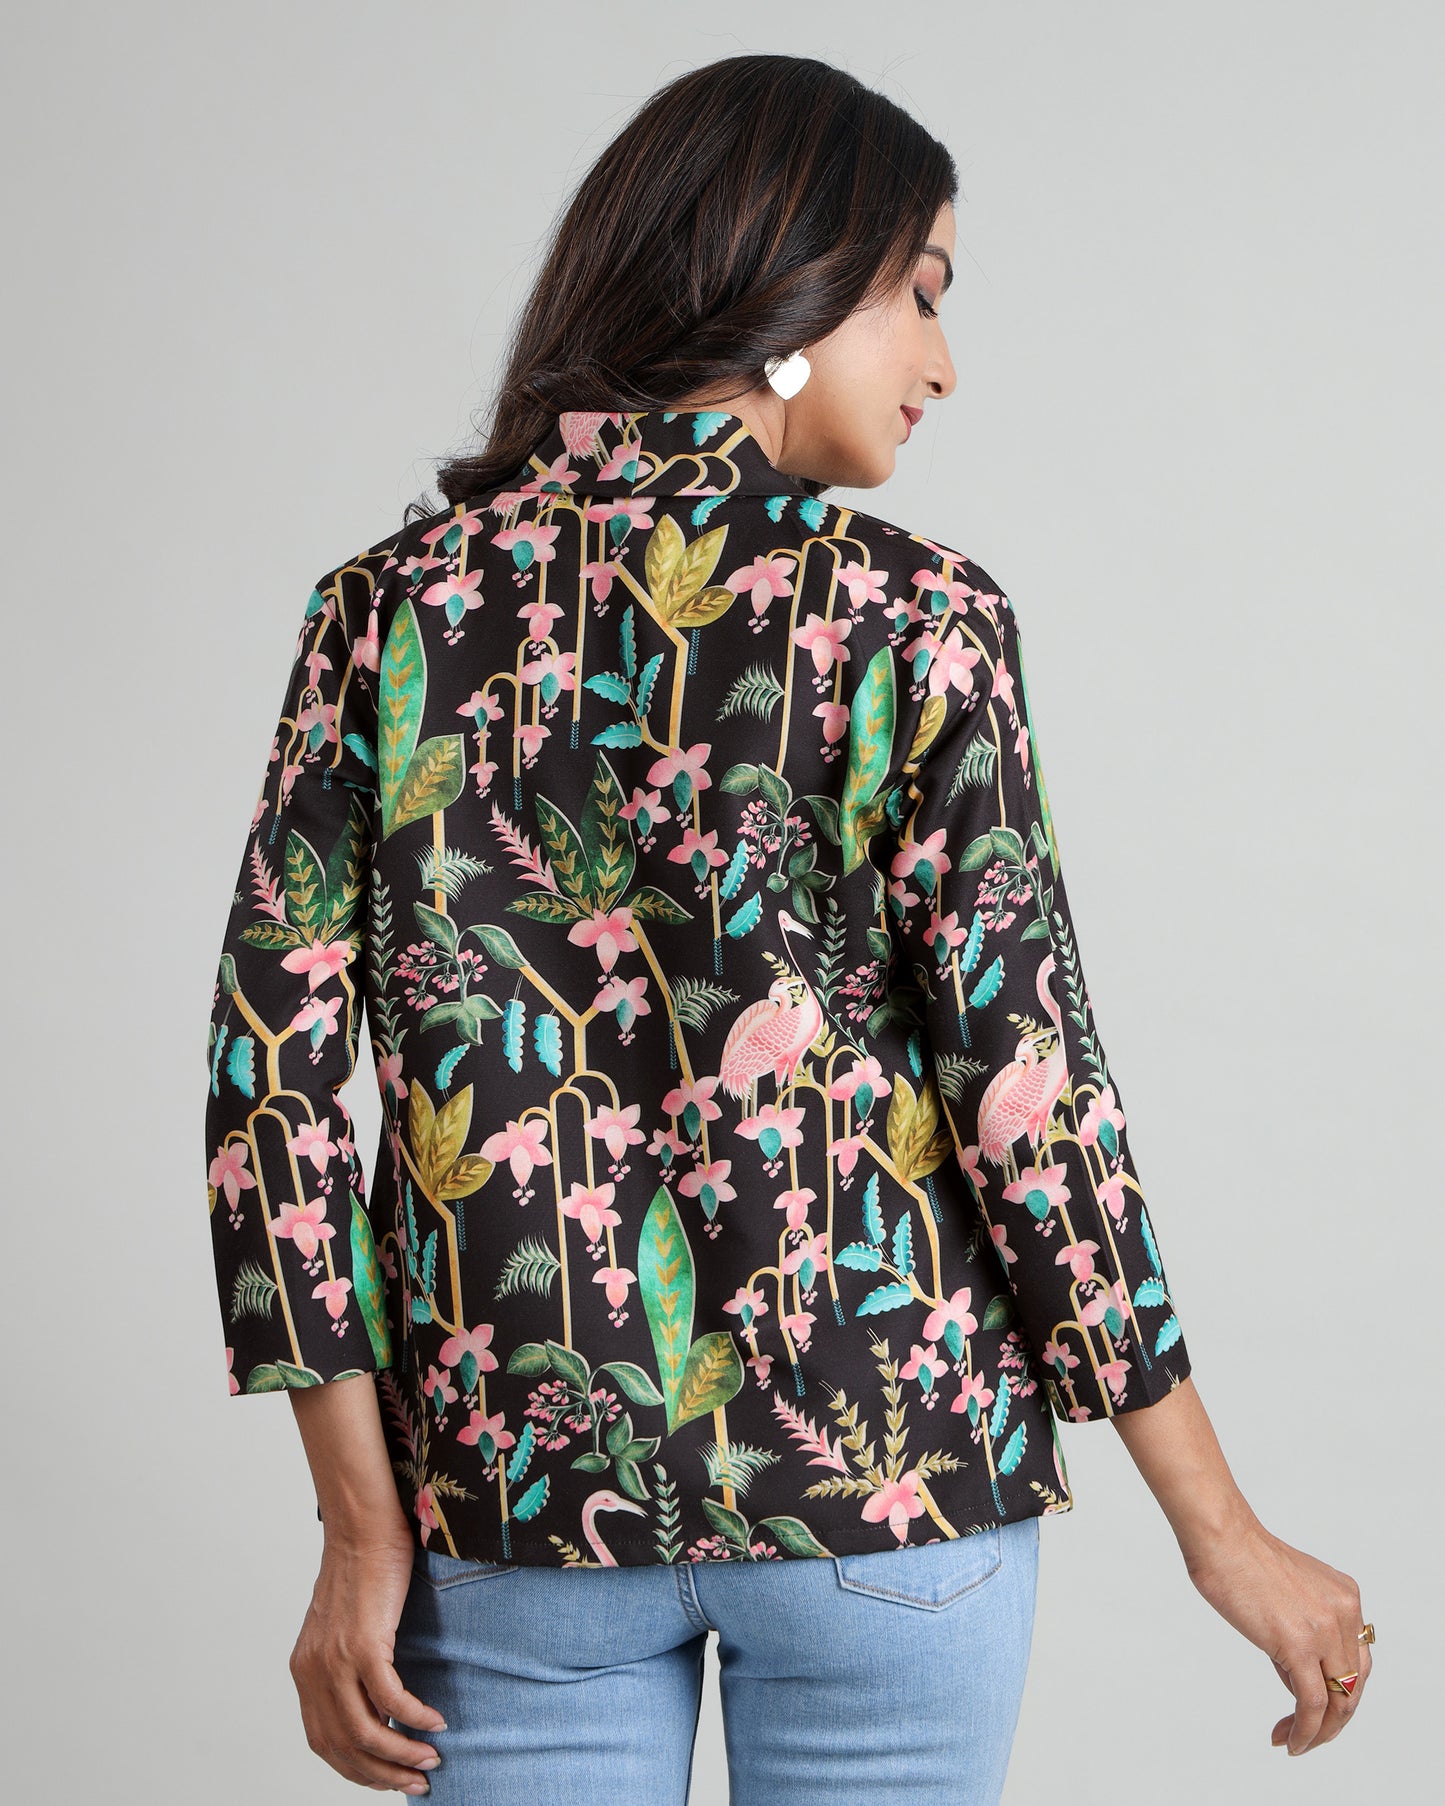 The Jacket That Tells a Story: A Vintage Floral Dream